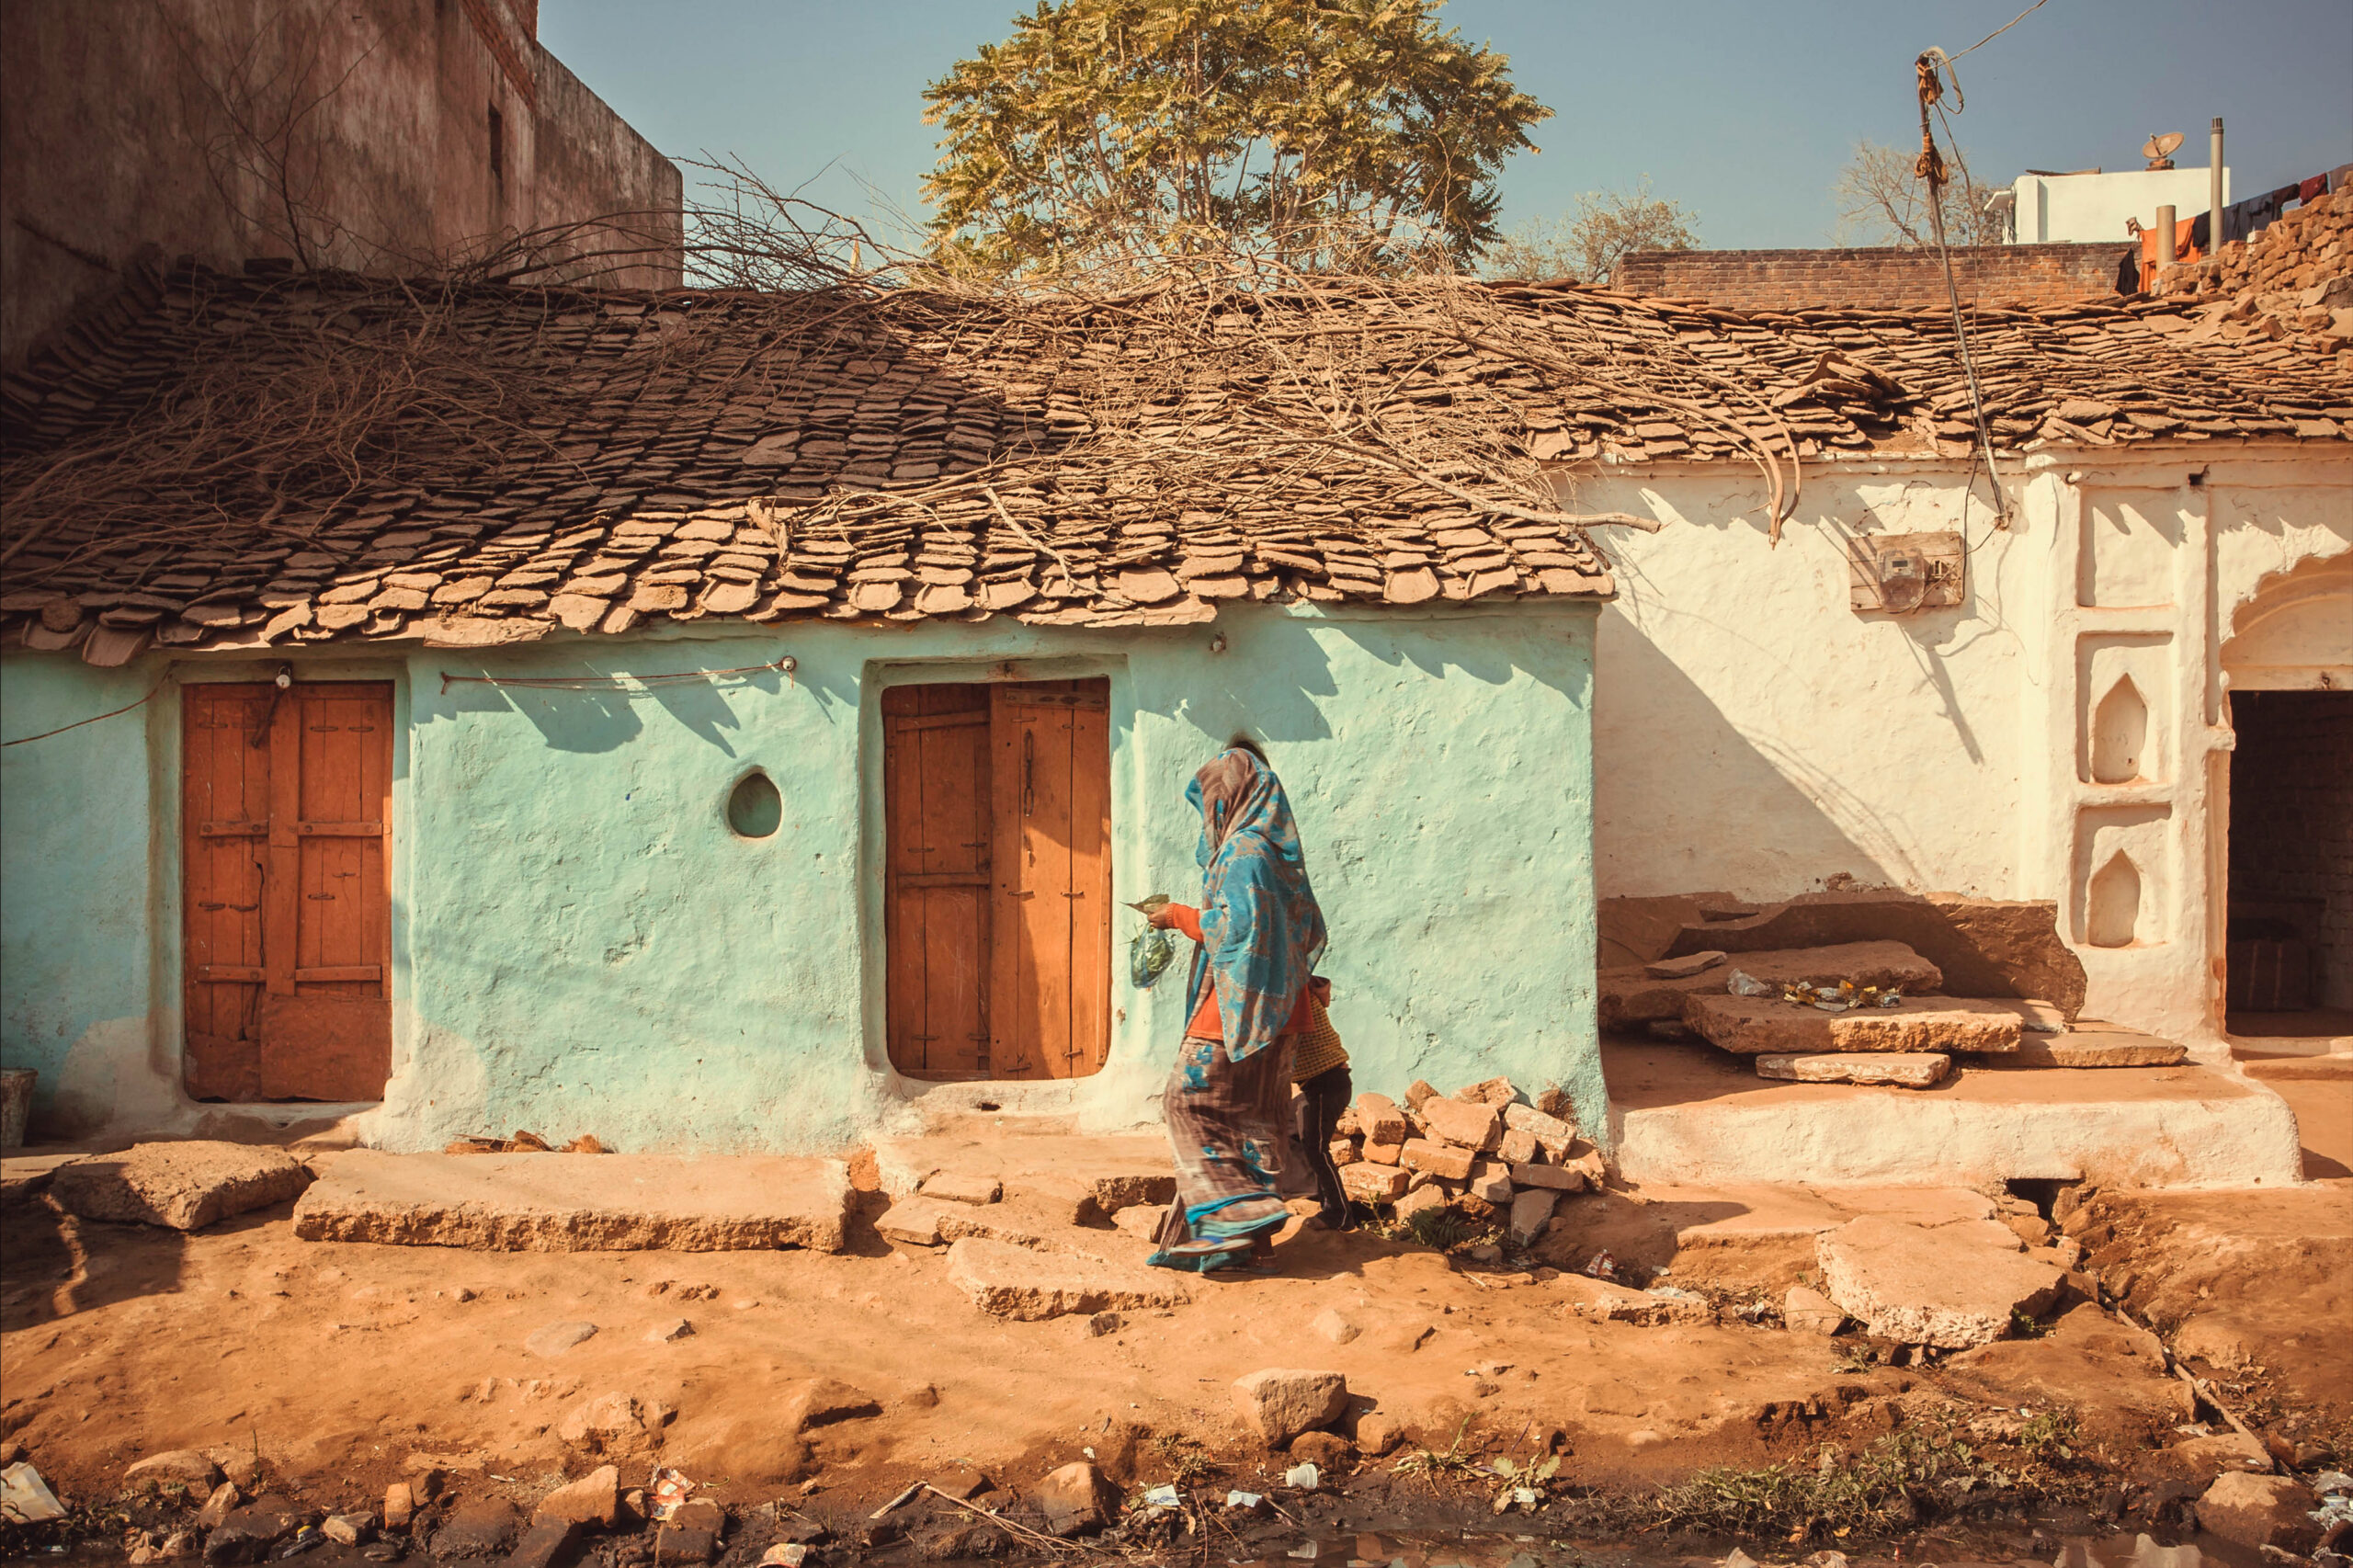 People walking past small traditional indian village house. Colorful buildings of rural area in India.